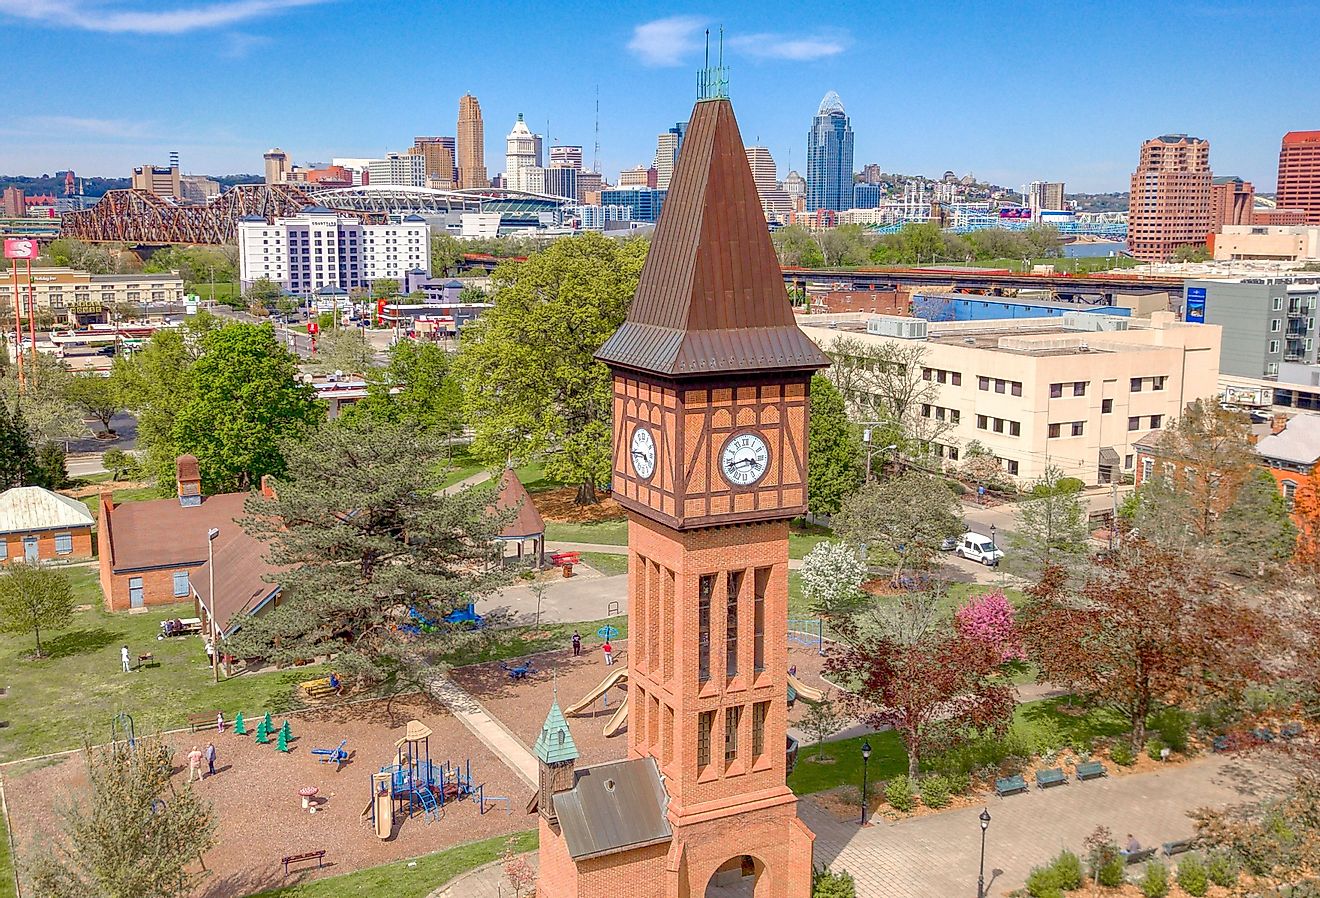 The Iconic Goebel Park Clock Tower in Covington, Kentucky with the skyline of Cincinnati in the background.